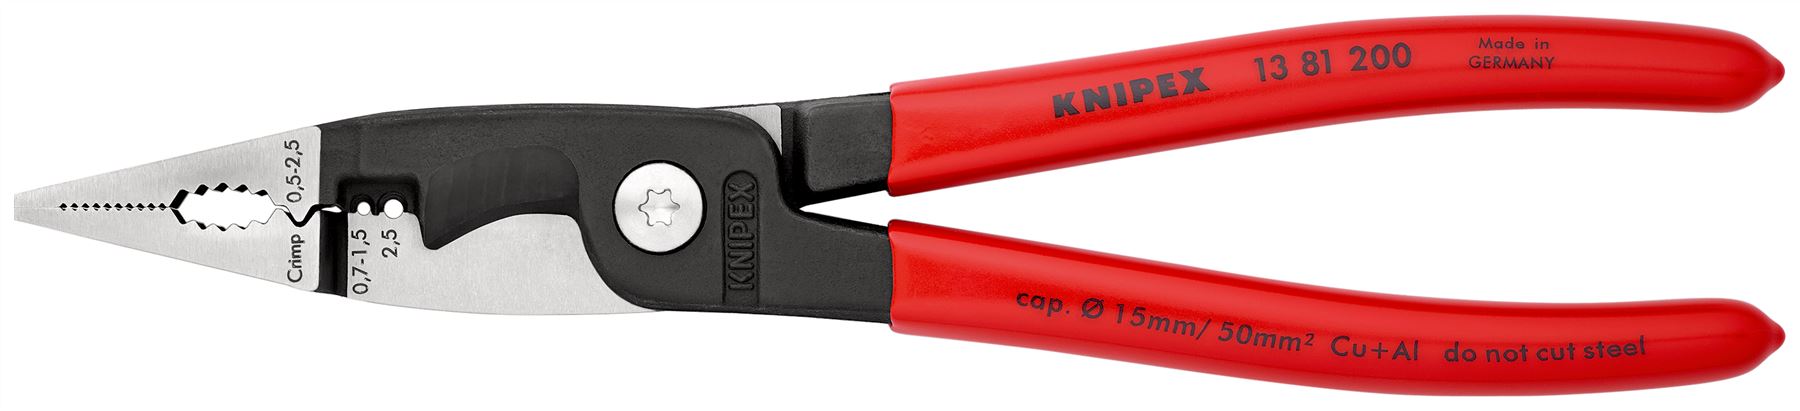 Knipex Piers for Electrical Installation 200mm 13 81 200